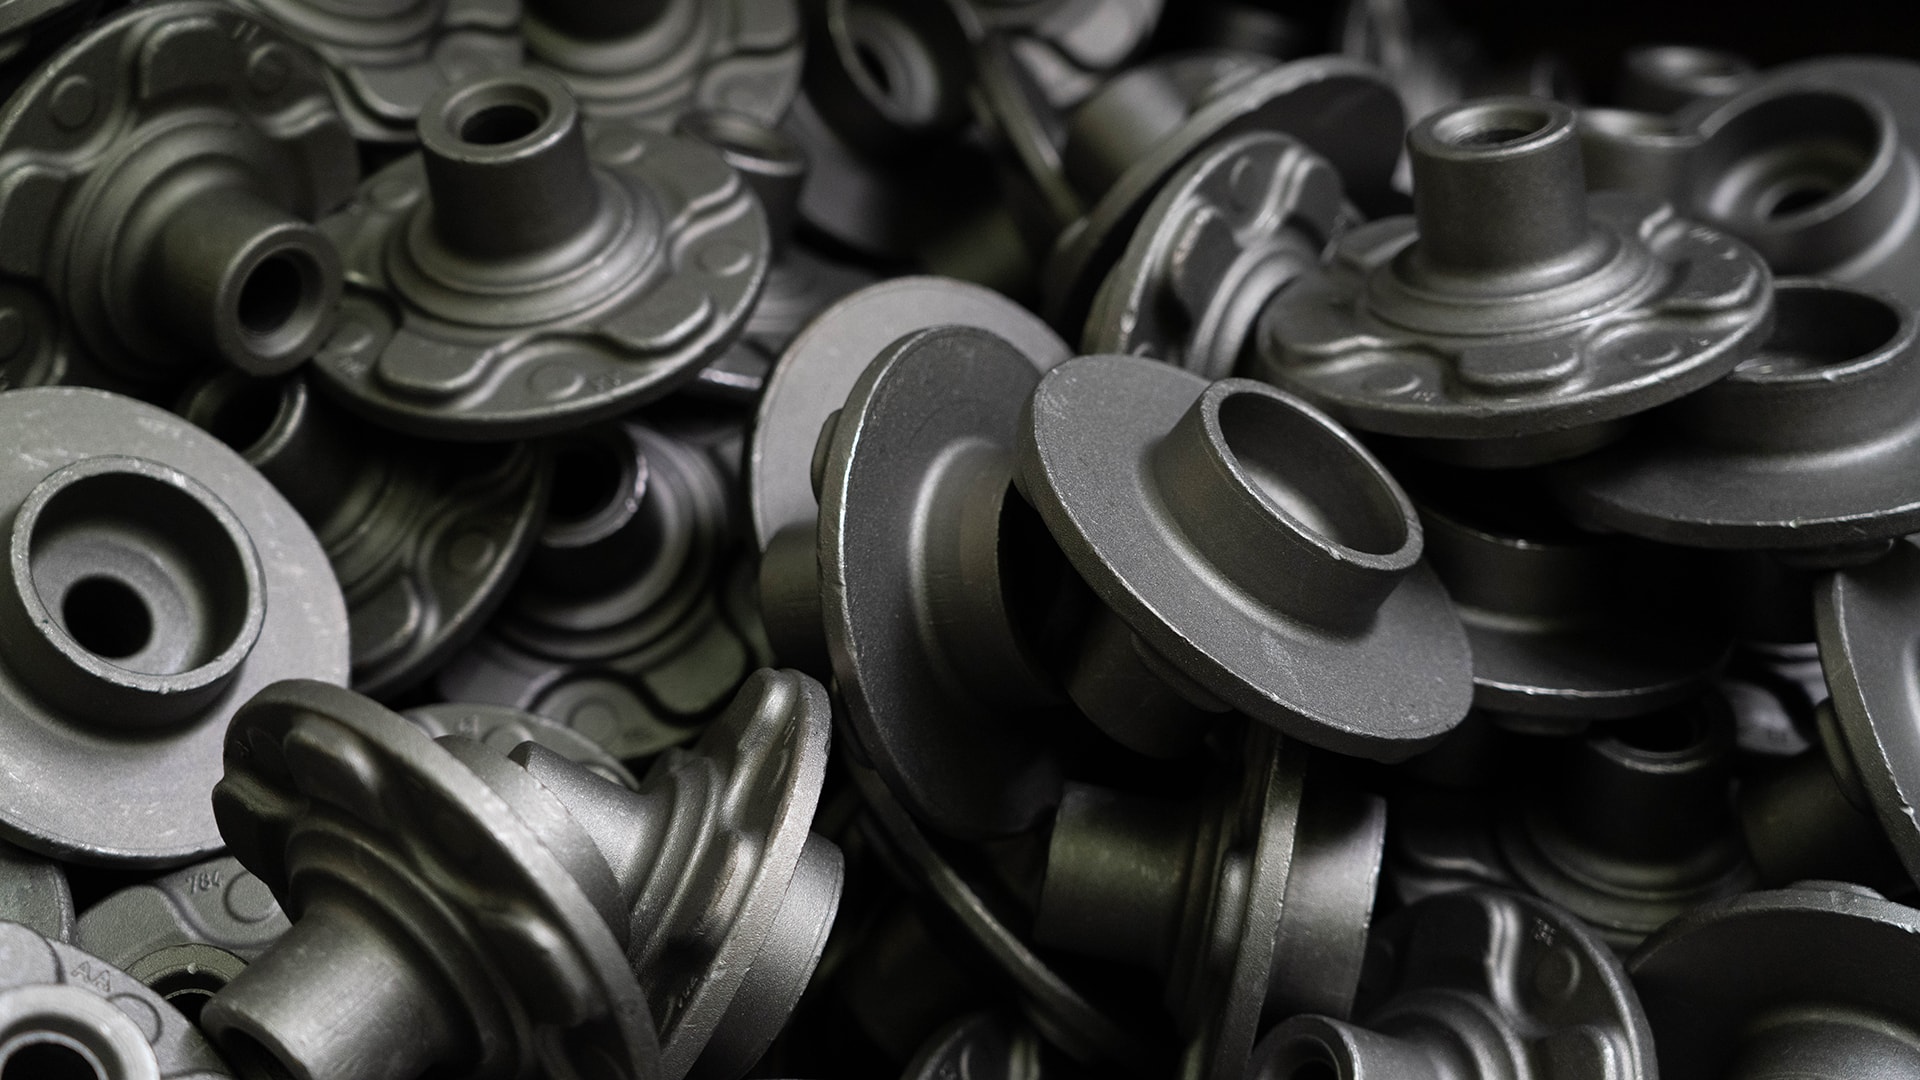 The Hirschvogel Group, a leading manufacturing specialist for automotive parts, produces several tens of thousands of wheel hubs daily.